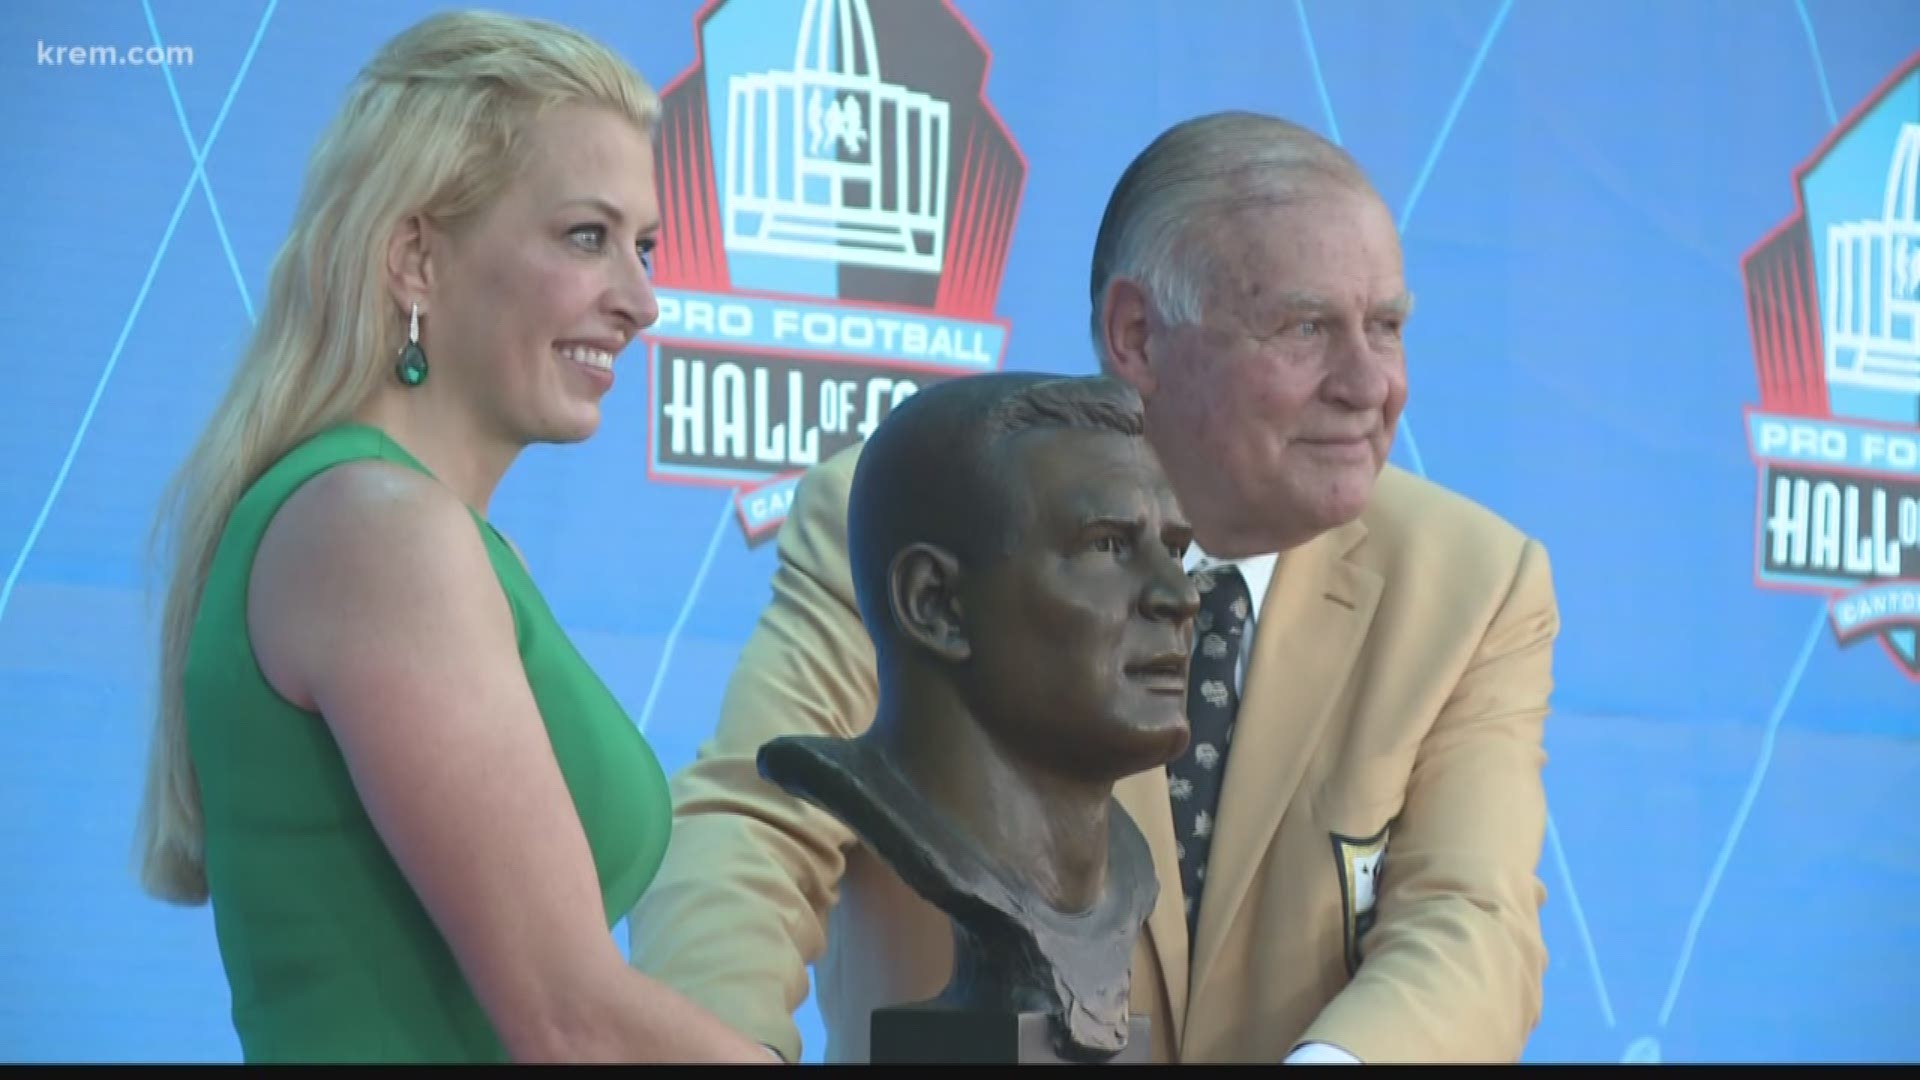 The former University of Idaho football star and Green Bay Packers offensive lineman was officially inducted in the Pro Football Hall of Fame.